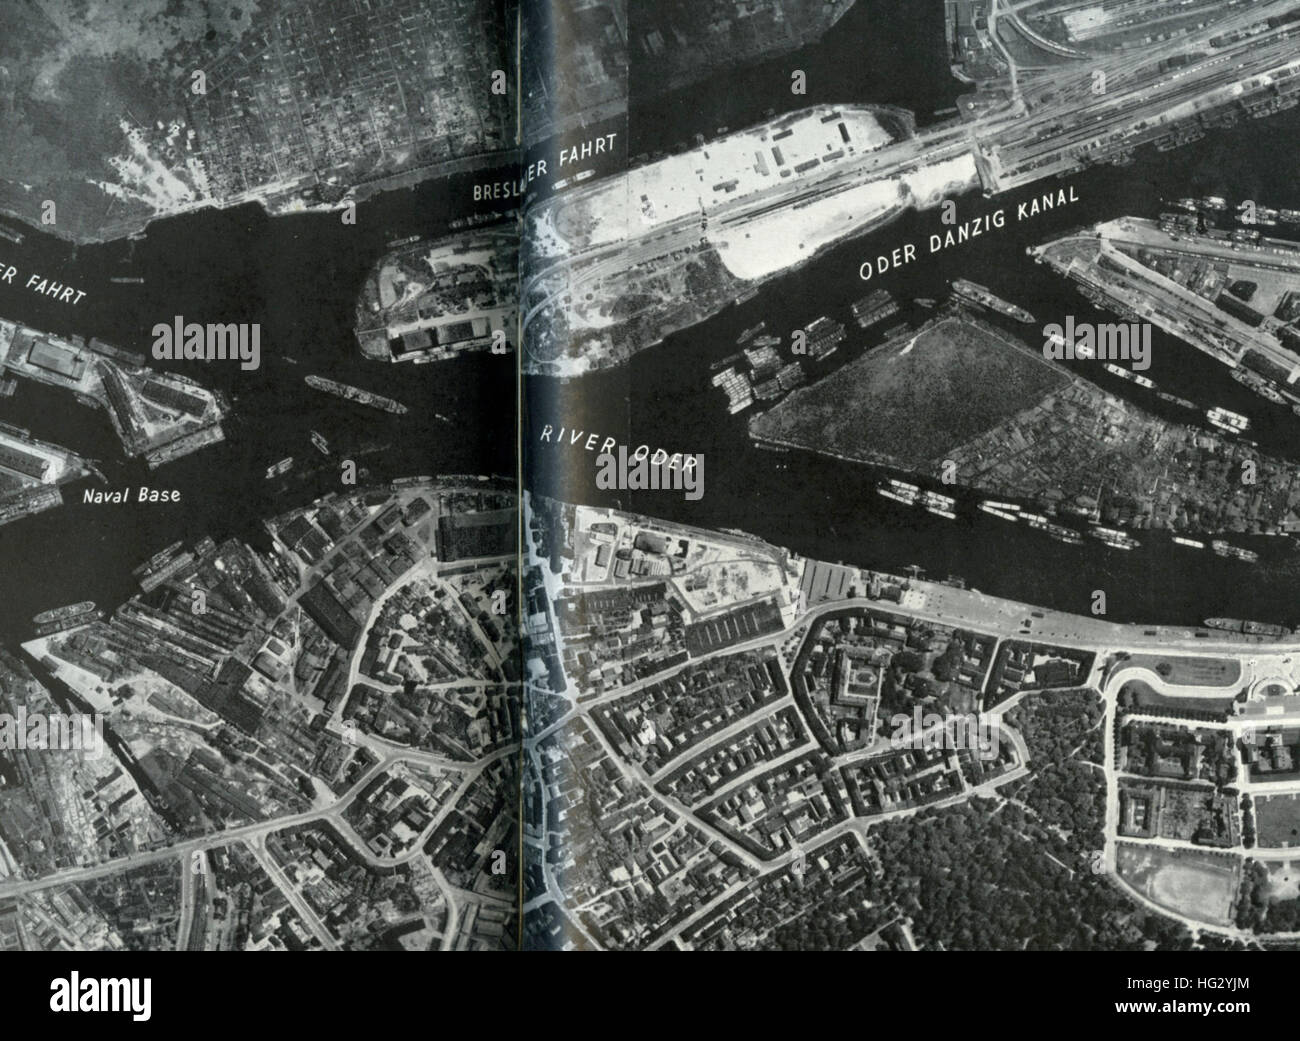 STETTIN, Germany, June 1942. Air reconnaissance photo of the junction of the River Oder and the Danzig Canal published in Evidence in Camera in June 1942. Part of a series entitled Know Your Ports. Stock Photo